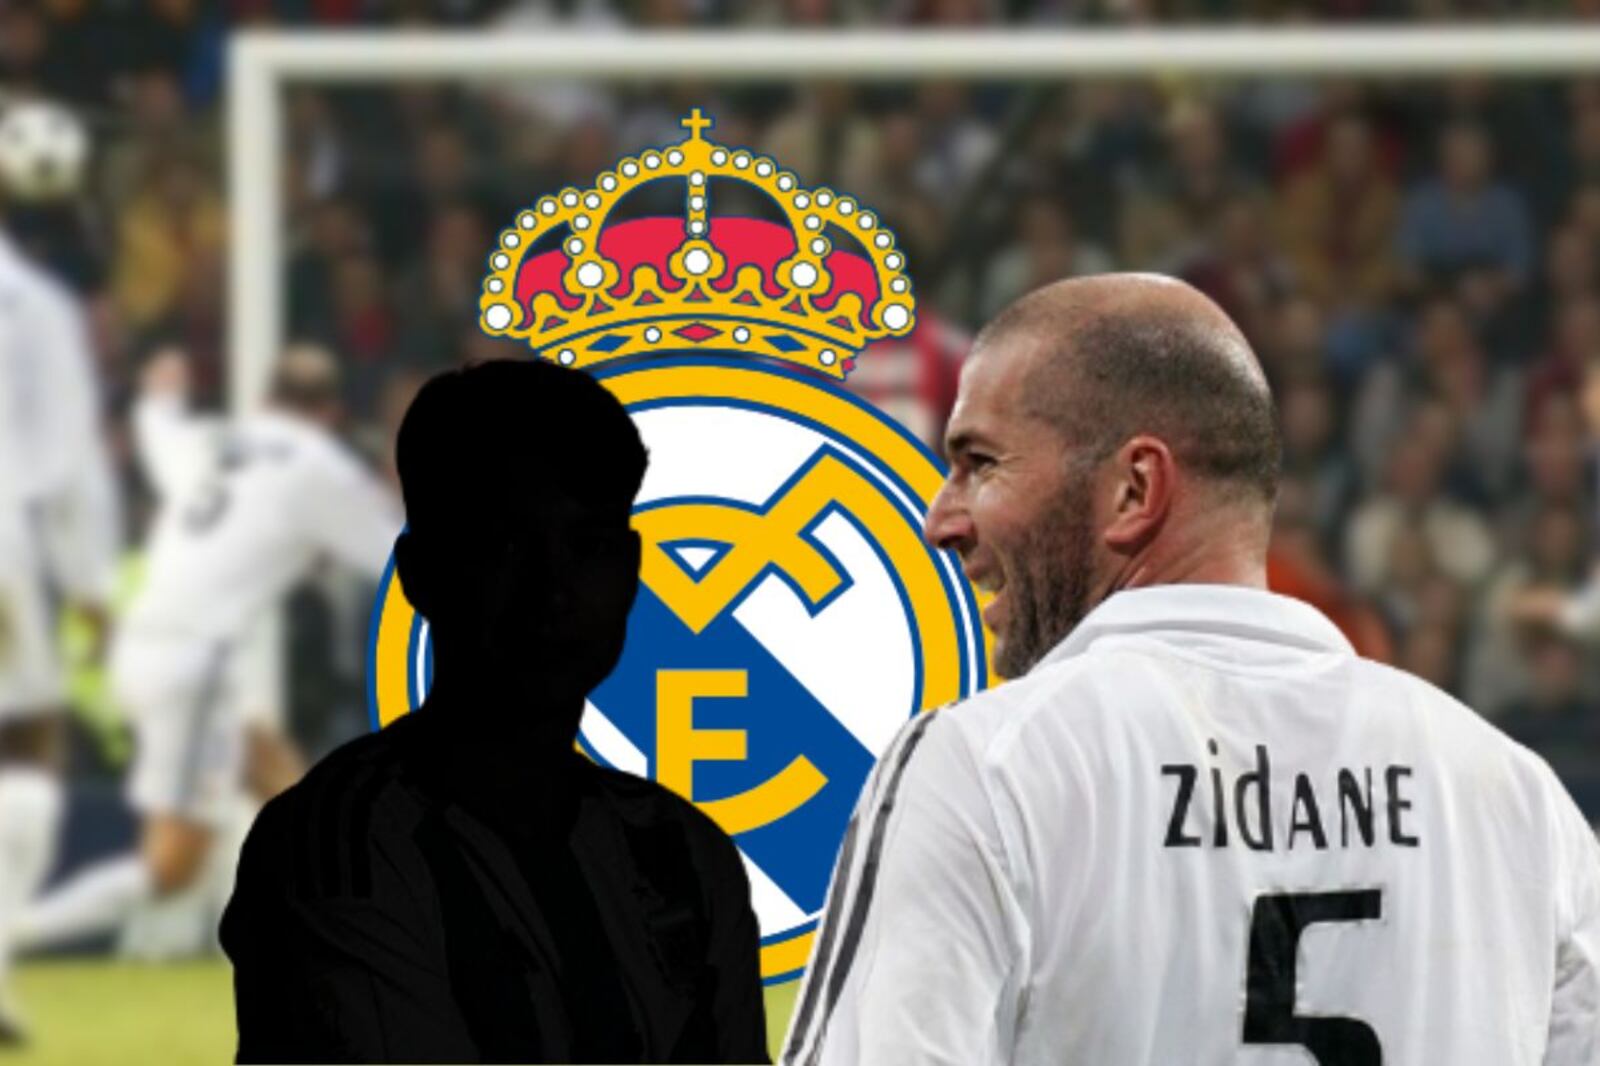 He is worth €25M and could follow in Zidane's footsteps at Real Madrid